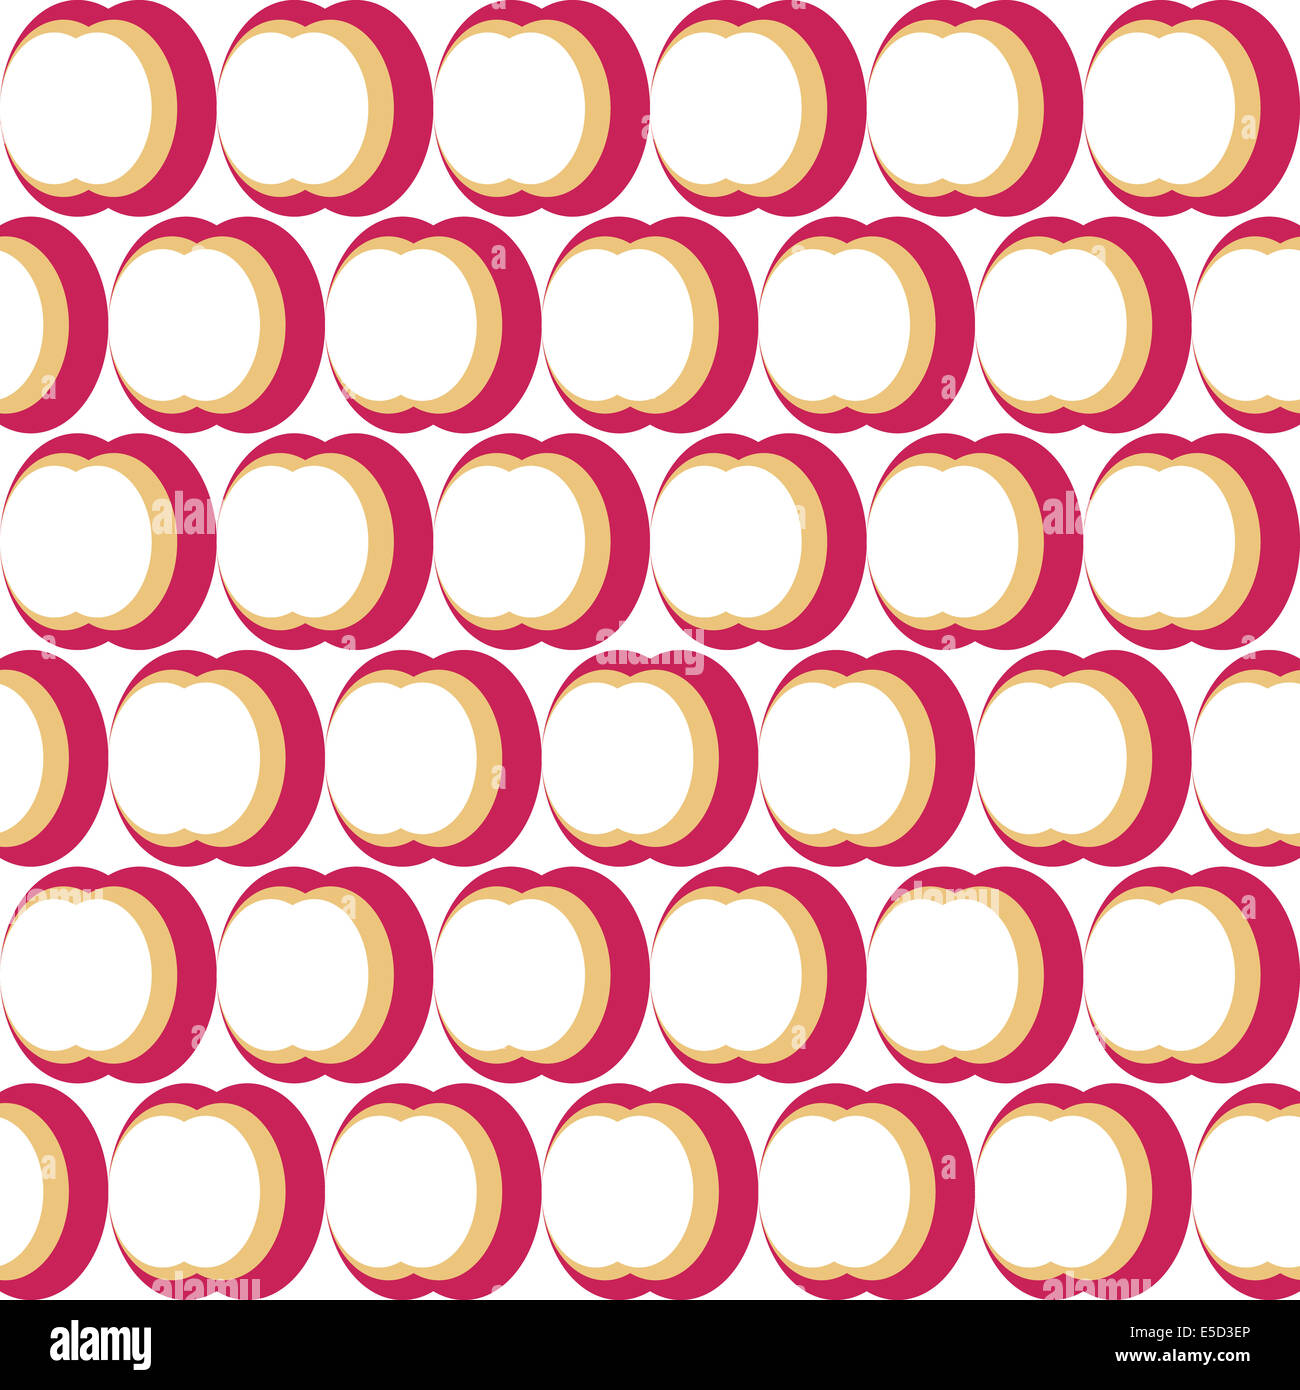 Vintage abstract seamless pattern Stock Photo